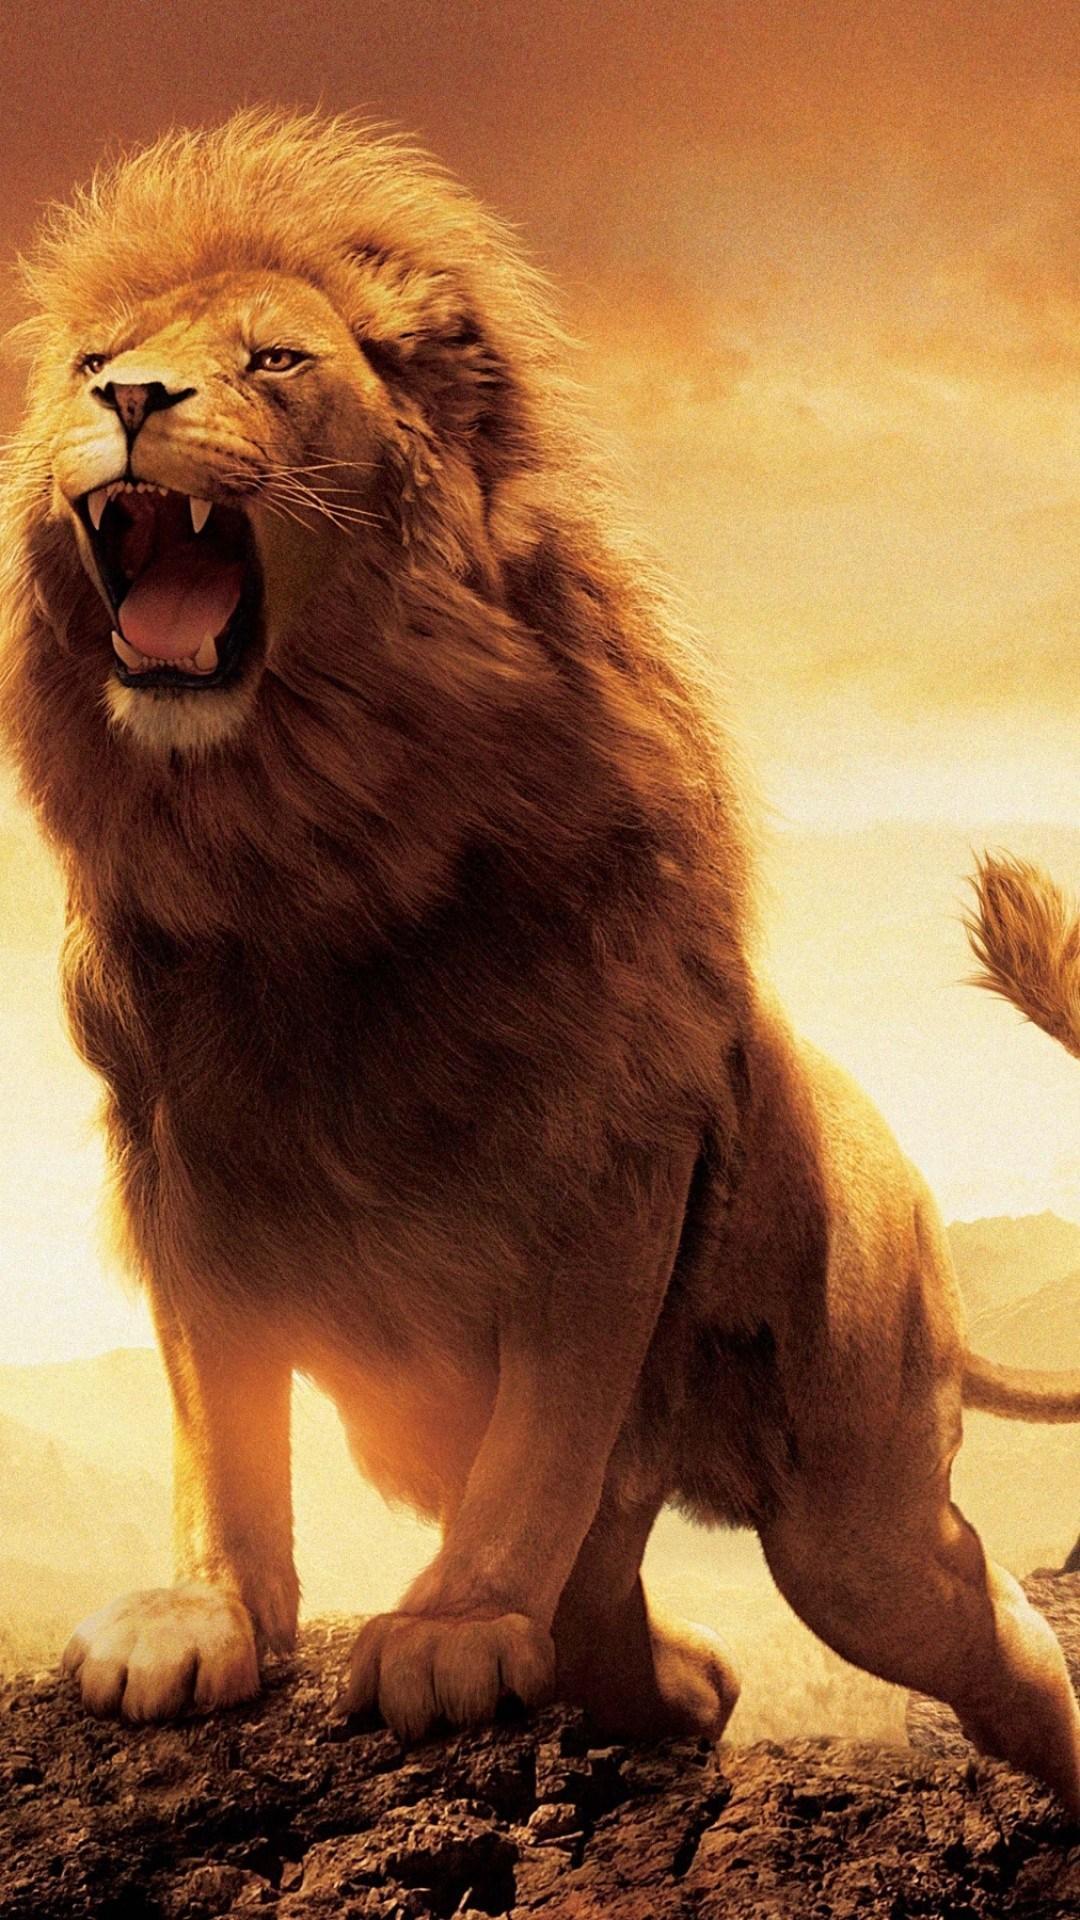 Lion HD Wallpaper For iPhone Wallpaper For iPhone 6